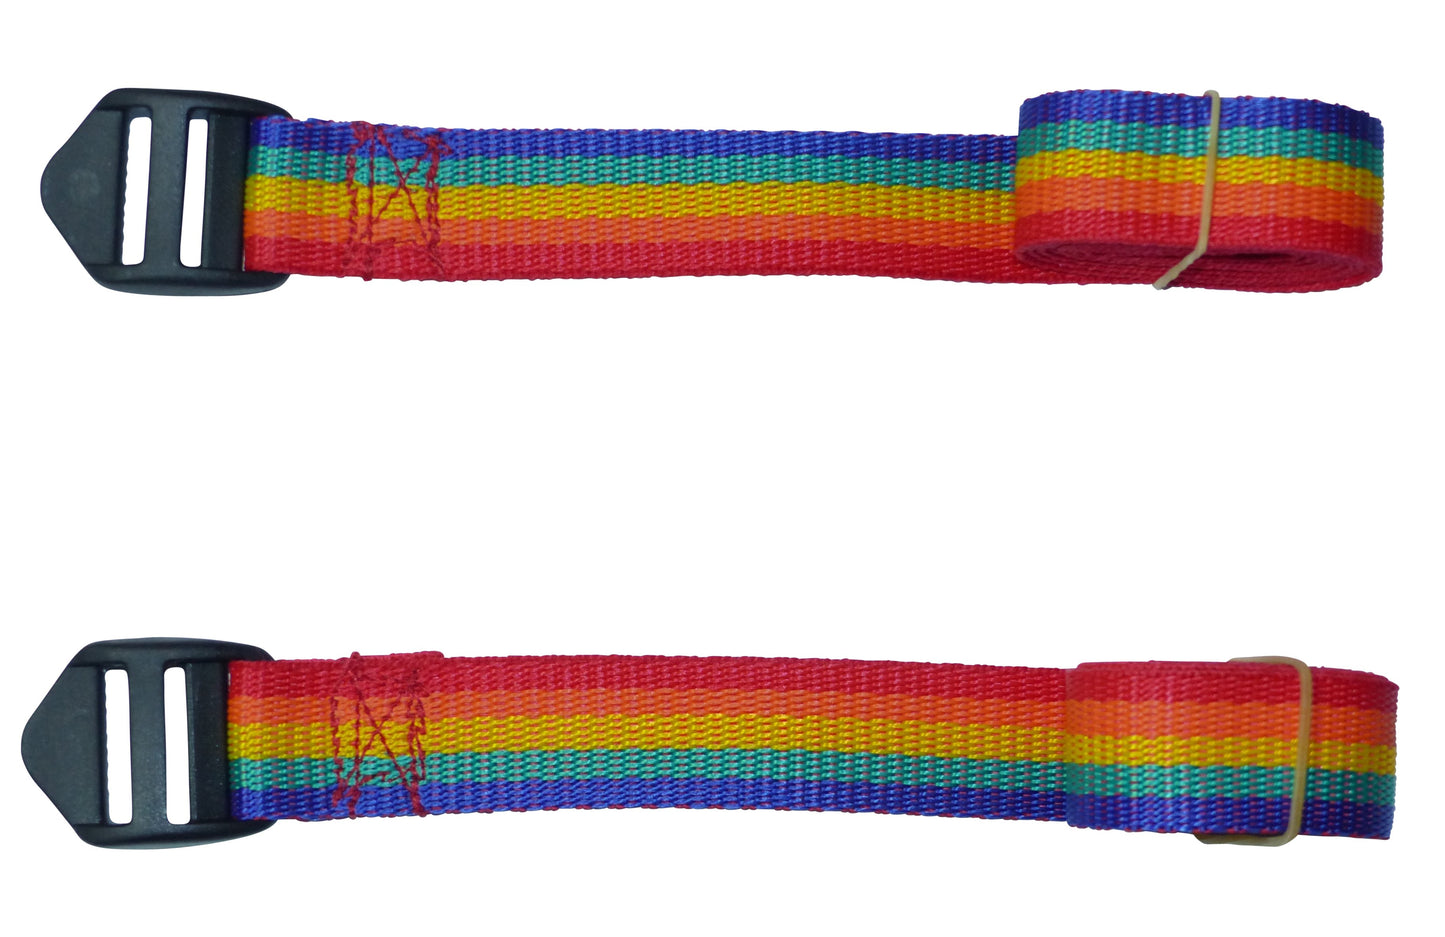 Benristraps 25mm Webbing Strap with Superstrong Ladderlock Buckle (Pair) in rainbow